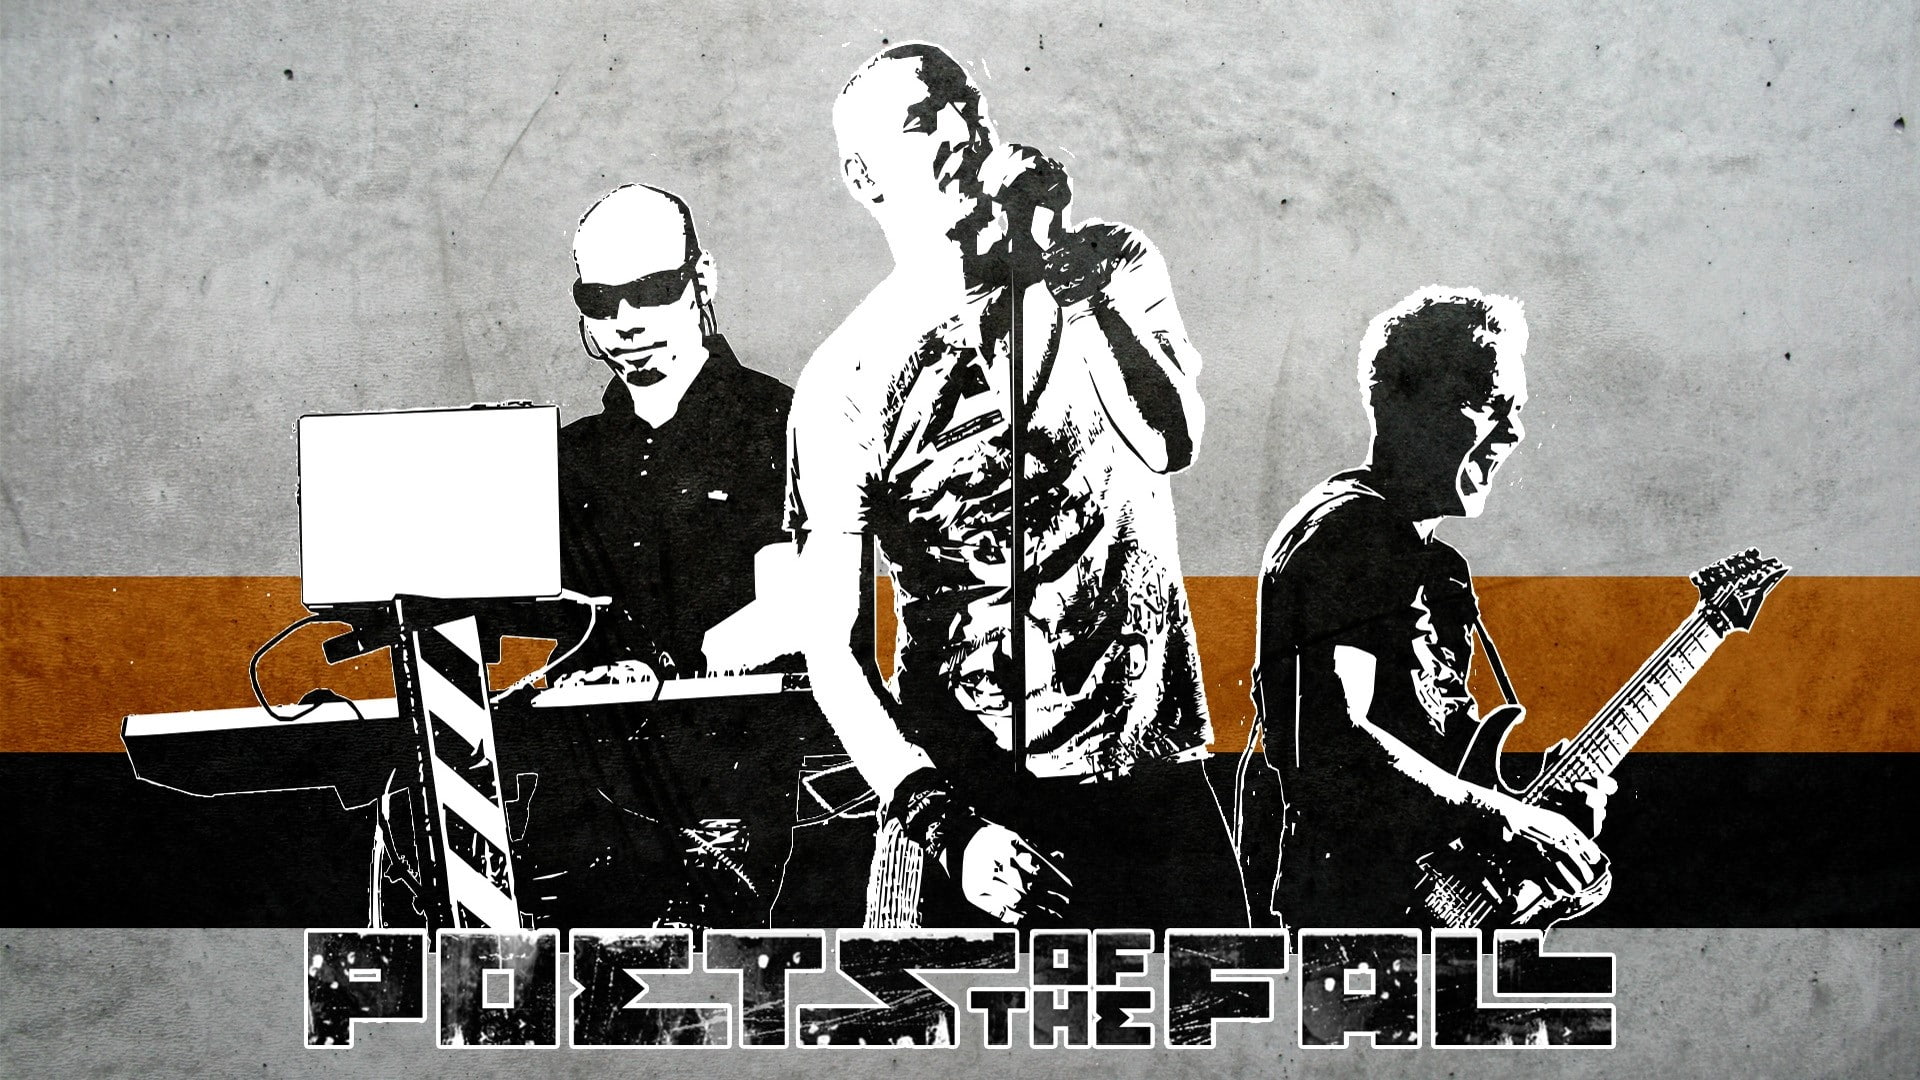 Poets of the fall, Band, Members, Picture, Show, creativity